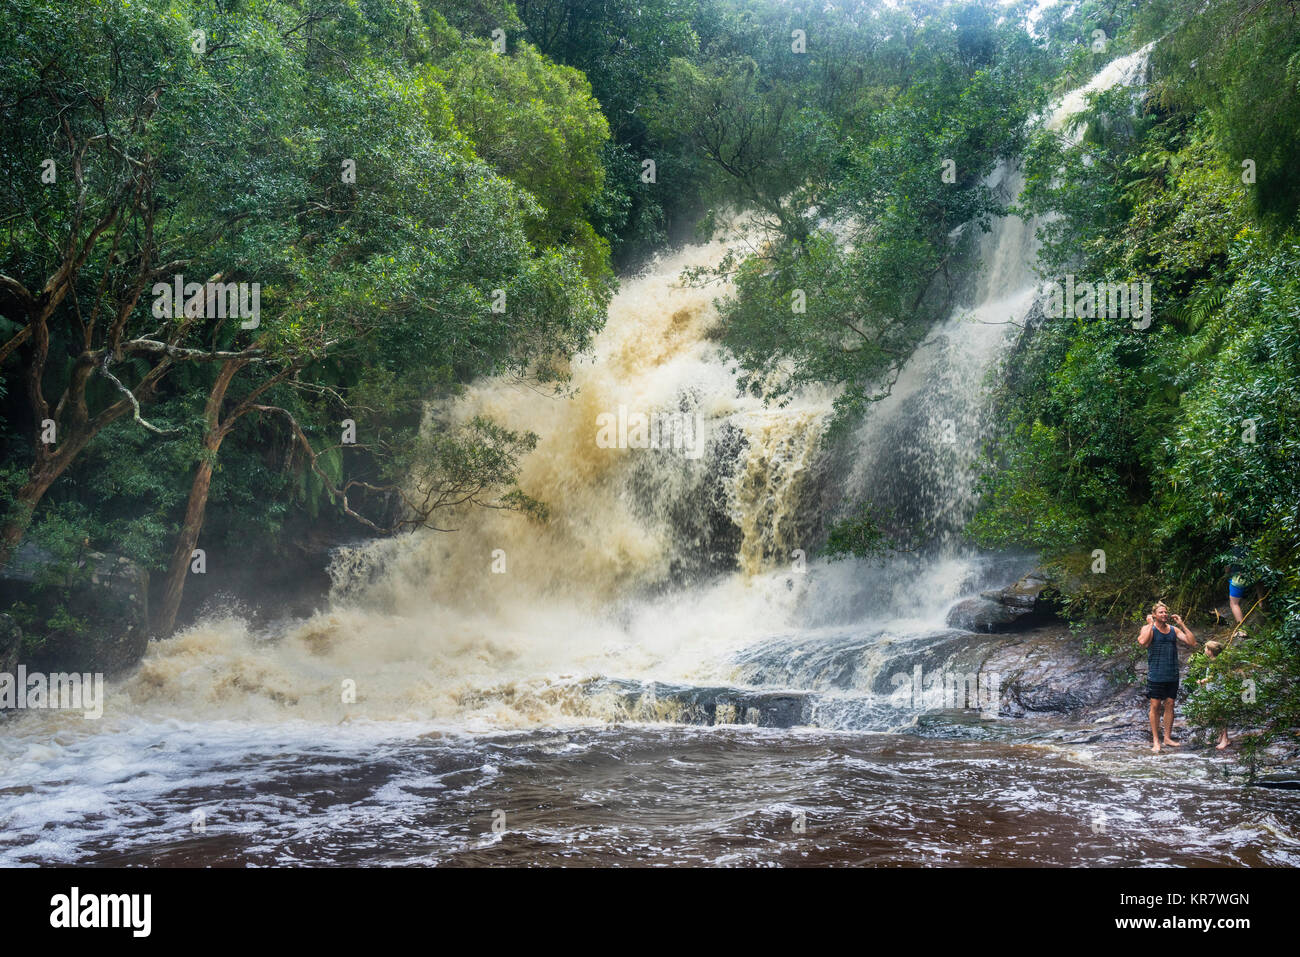 Australia, New South Wales, Central Coast, Brisbane Water National Park, Floods Creek forms a raging torrent after heavy rainfall at Somersby Falls Stock Photo